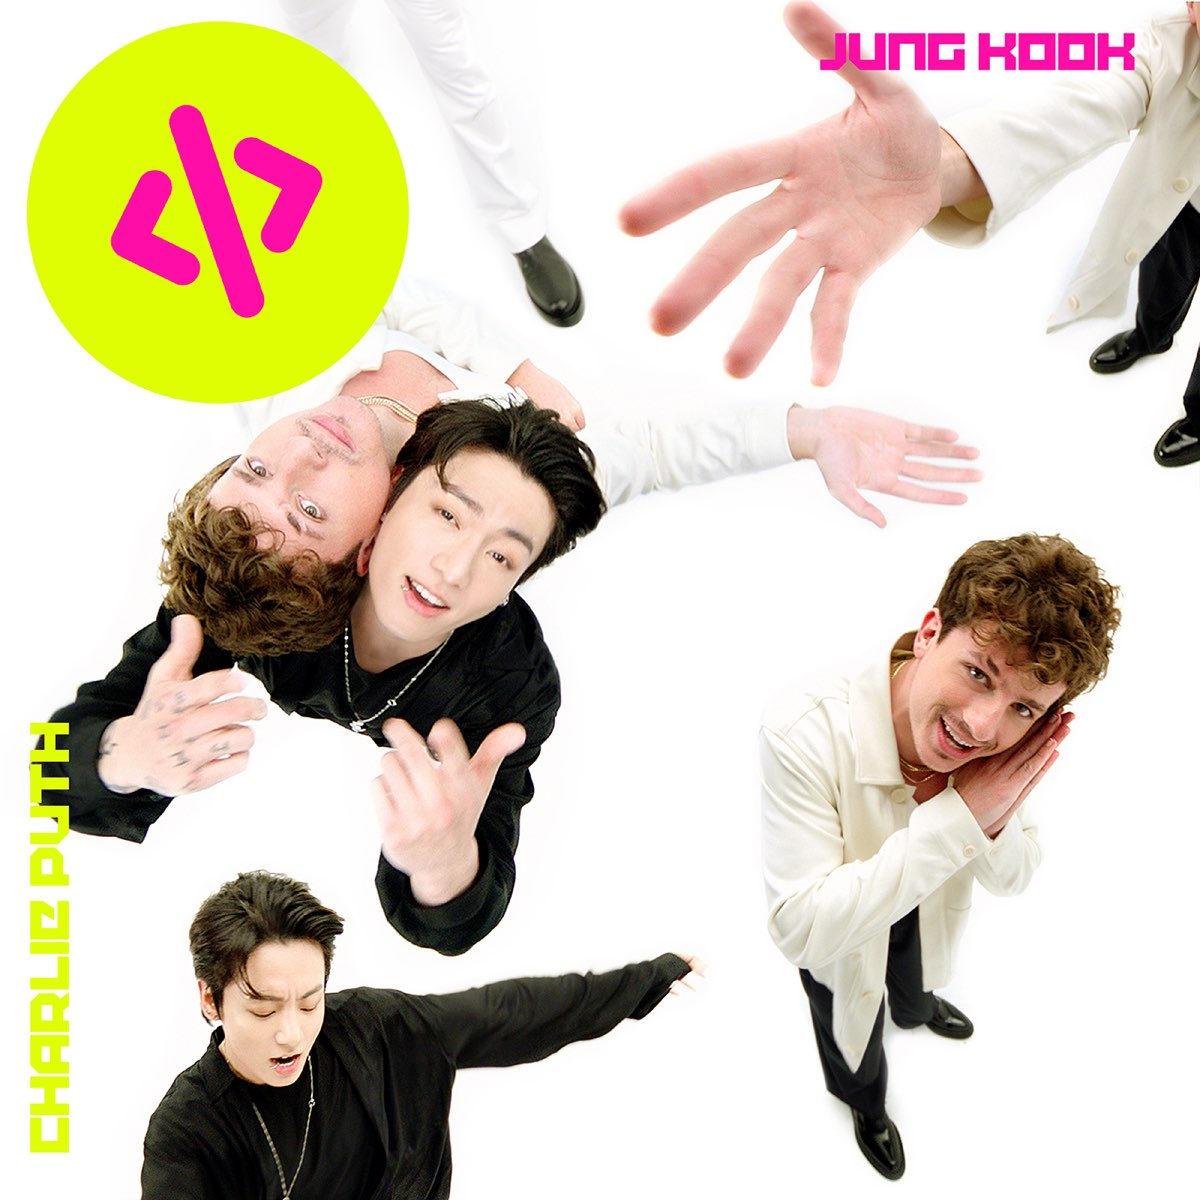 Duplicate DUPLICATE - Left and Right cover artwork